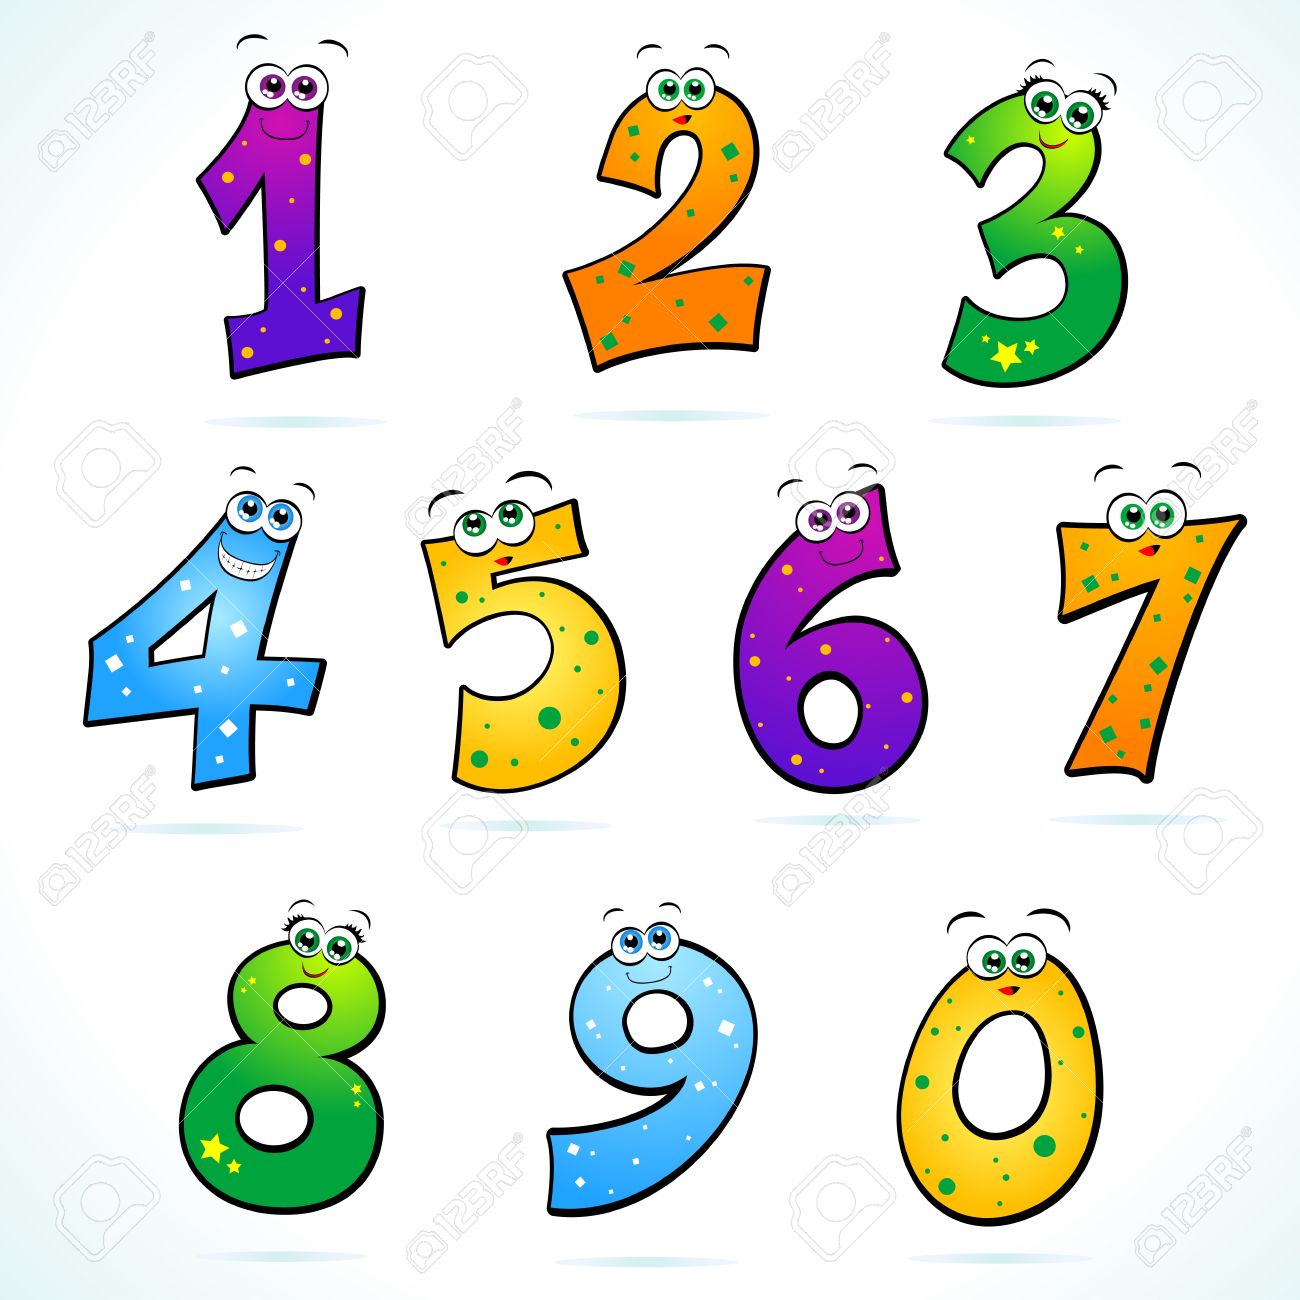 Clipart numbers clipart .